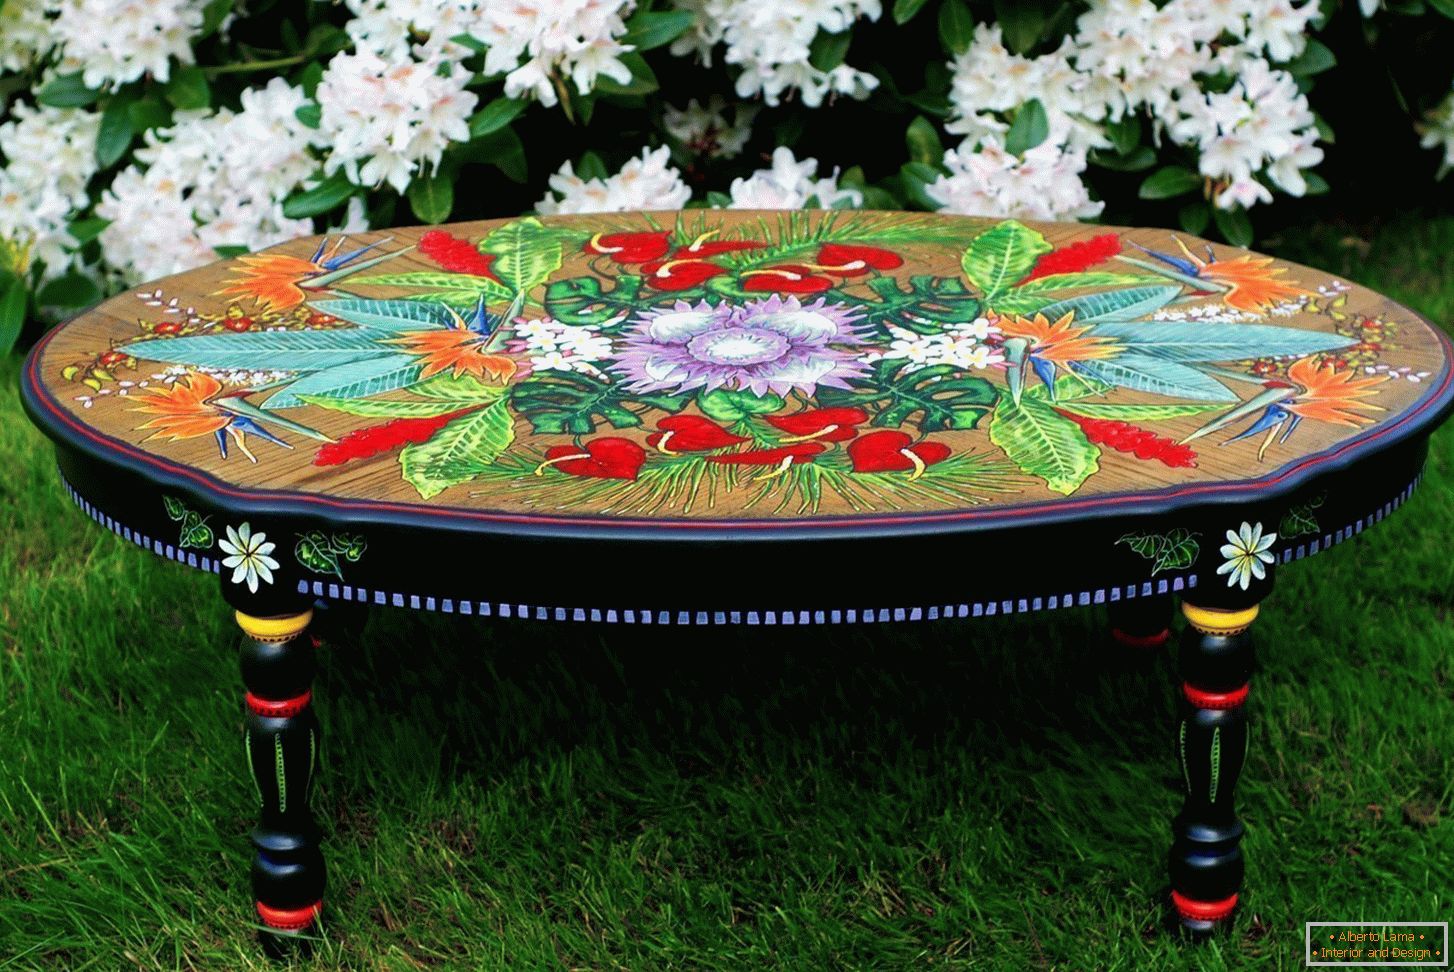 Hand-painted table